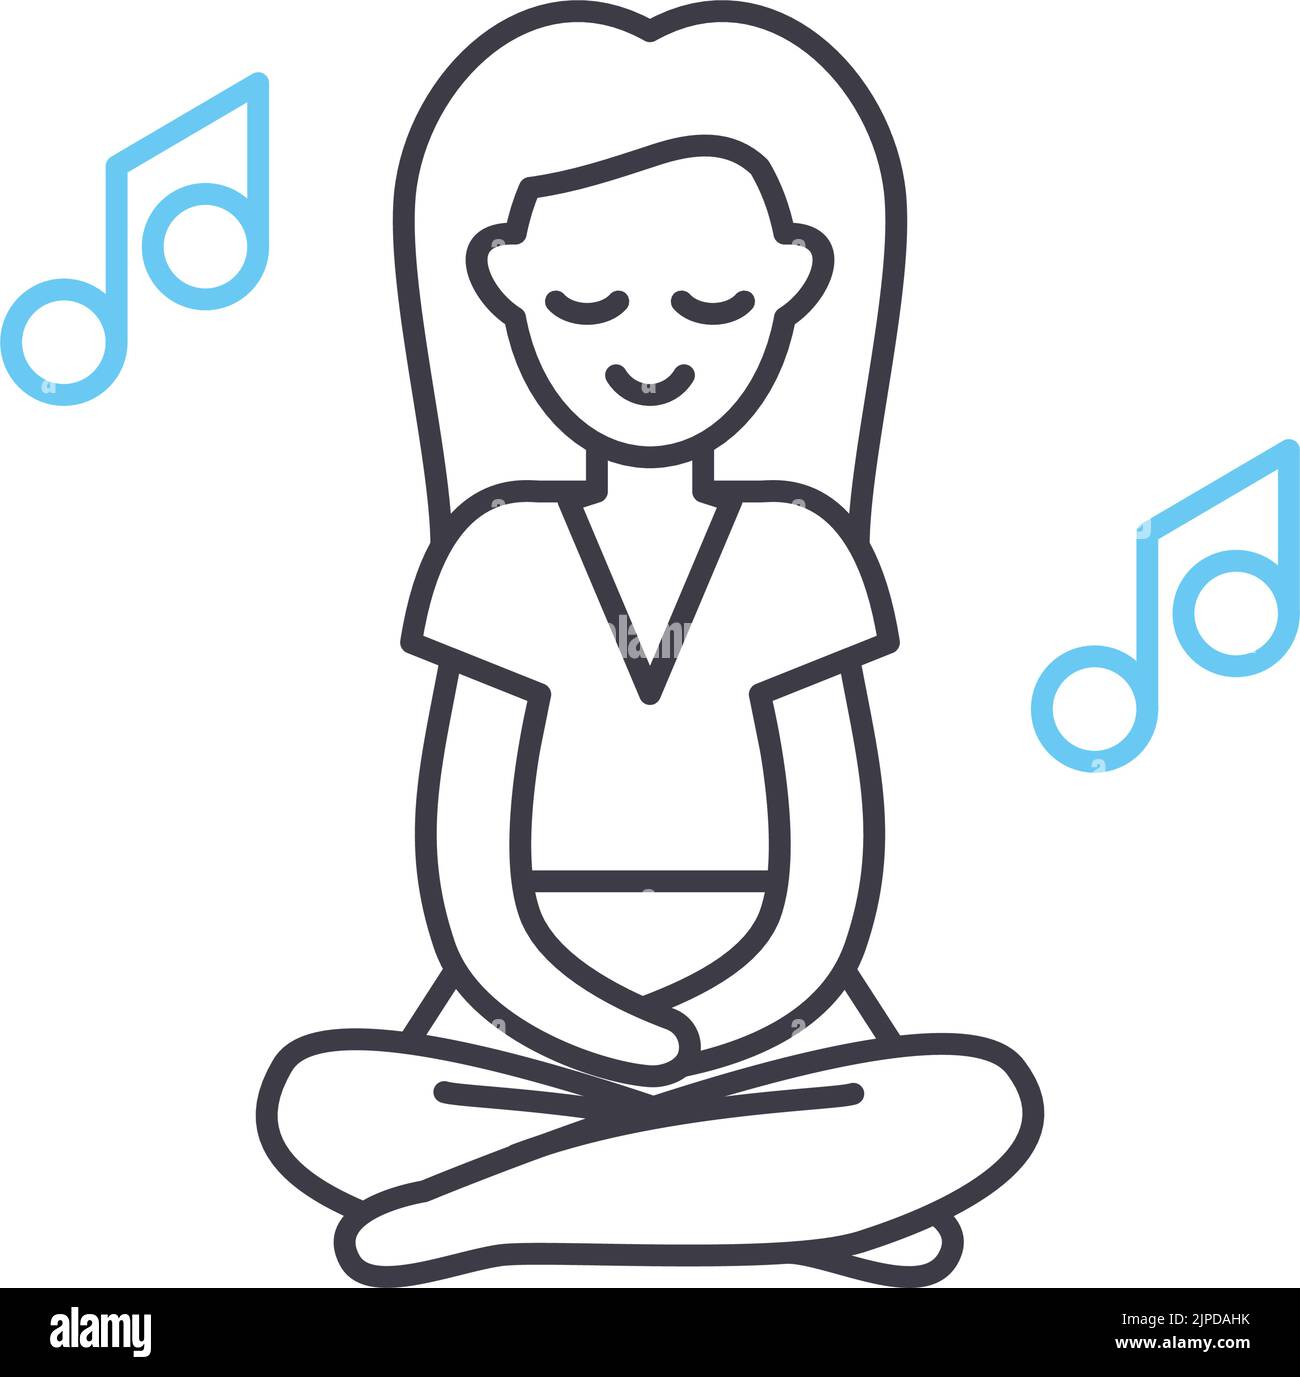 relaxation music line icon, outline symbol, vector illustration, concept sign Stock Vector